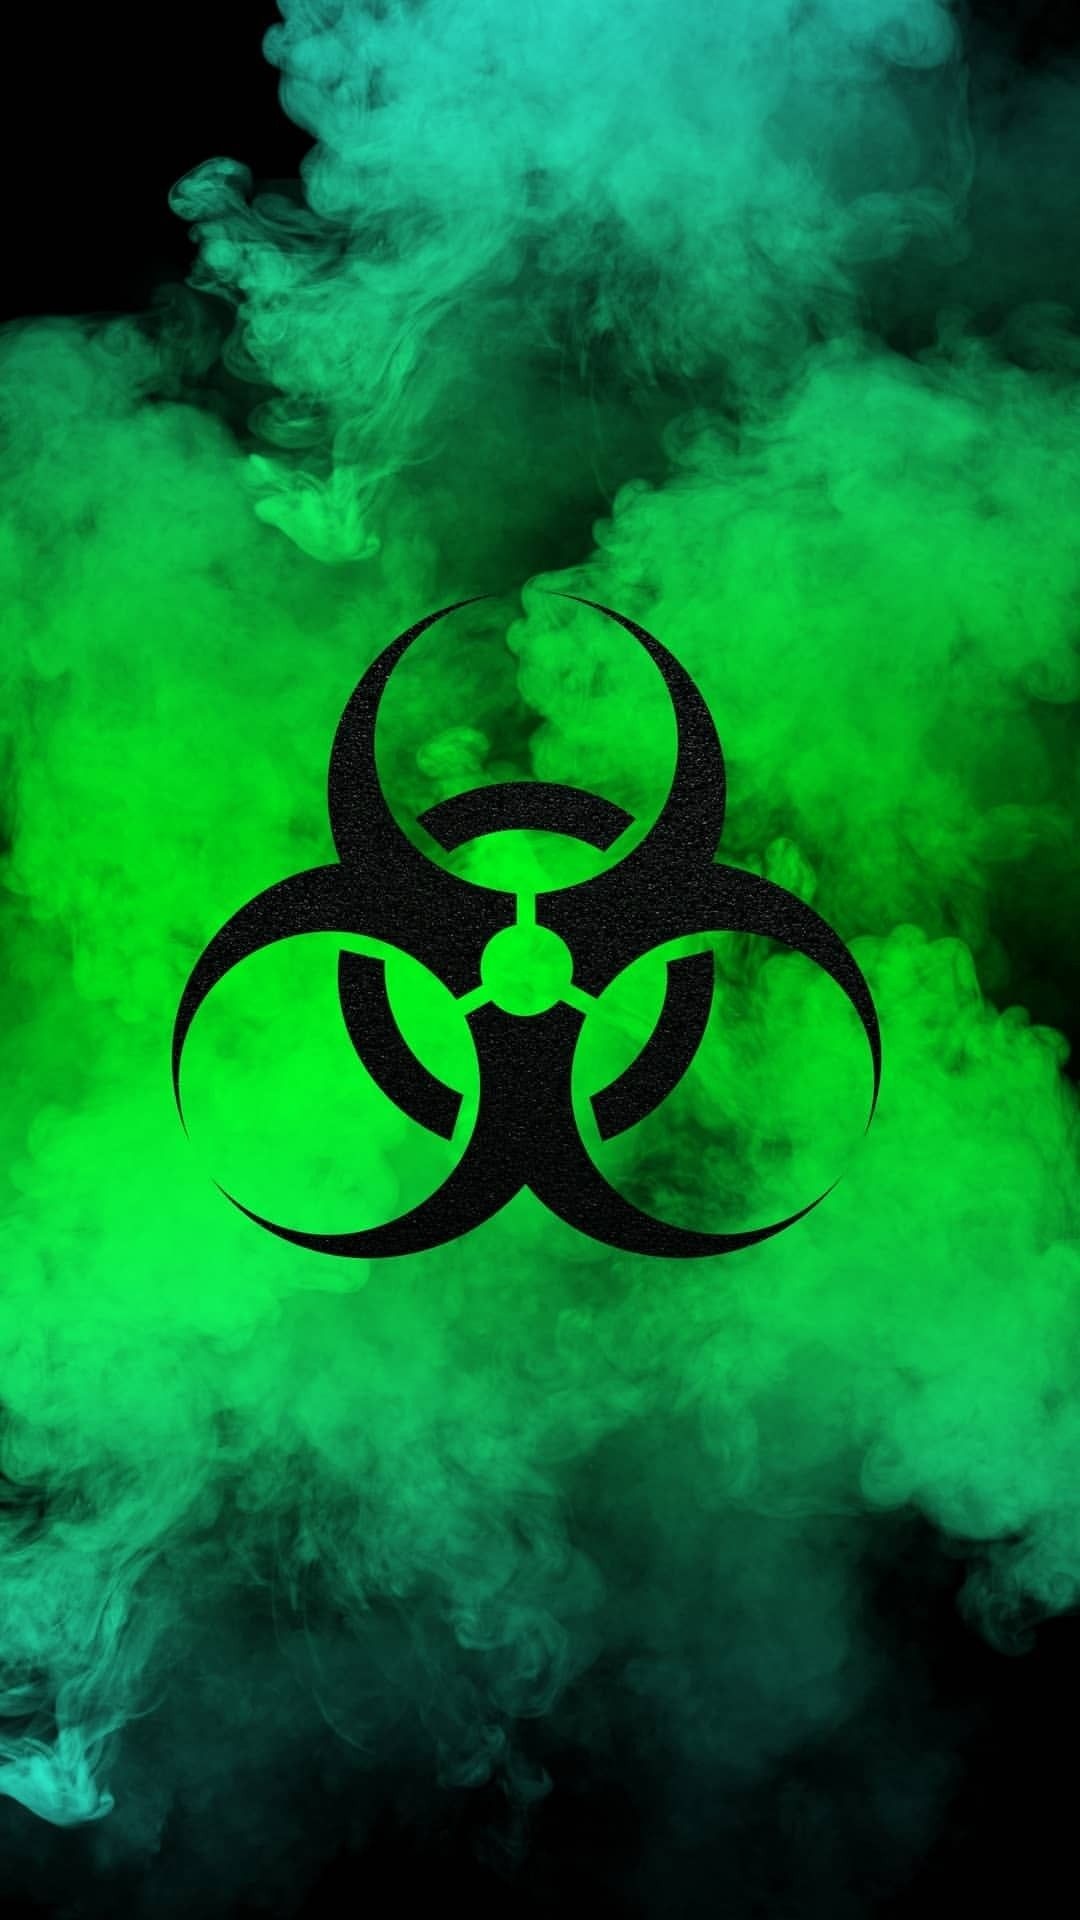 Green Biohazard: The labeling of biological materials that carry a significant health risk, including viral and bacteriological samples. 1080x1920 Full HD Wallpaper.